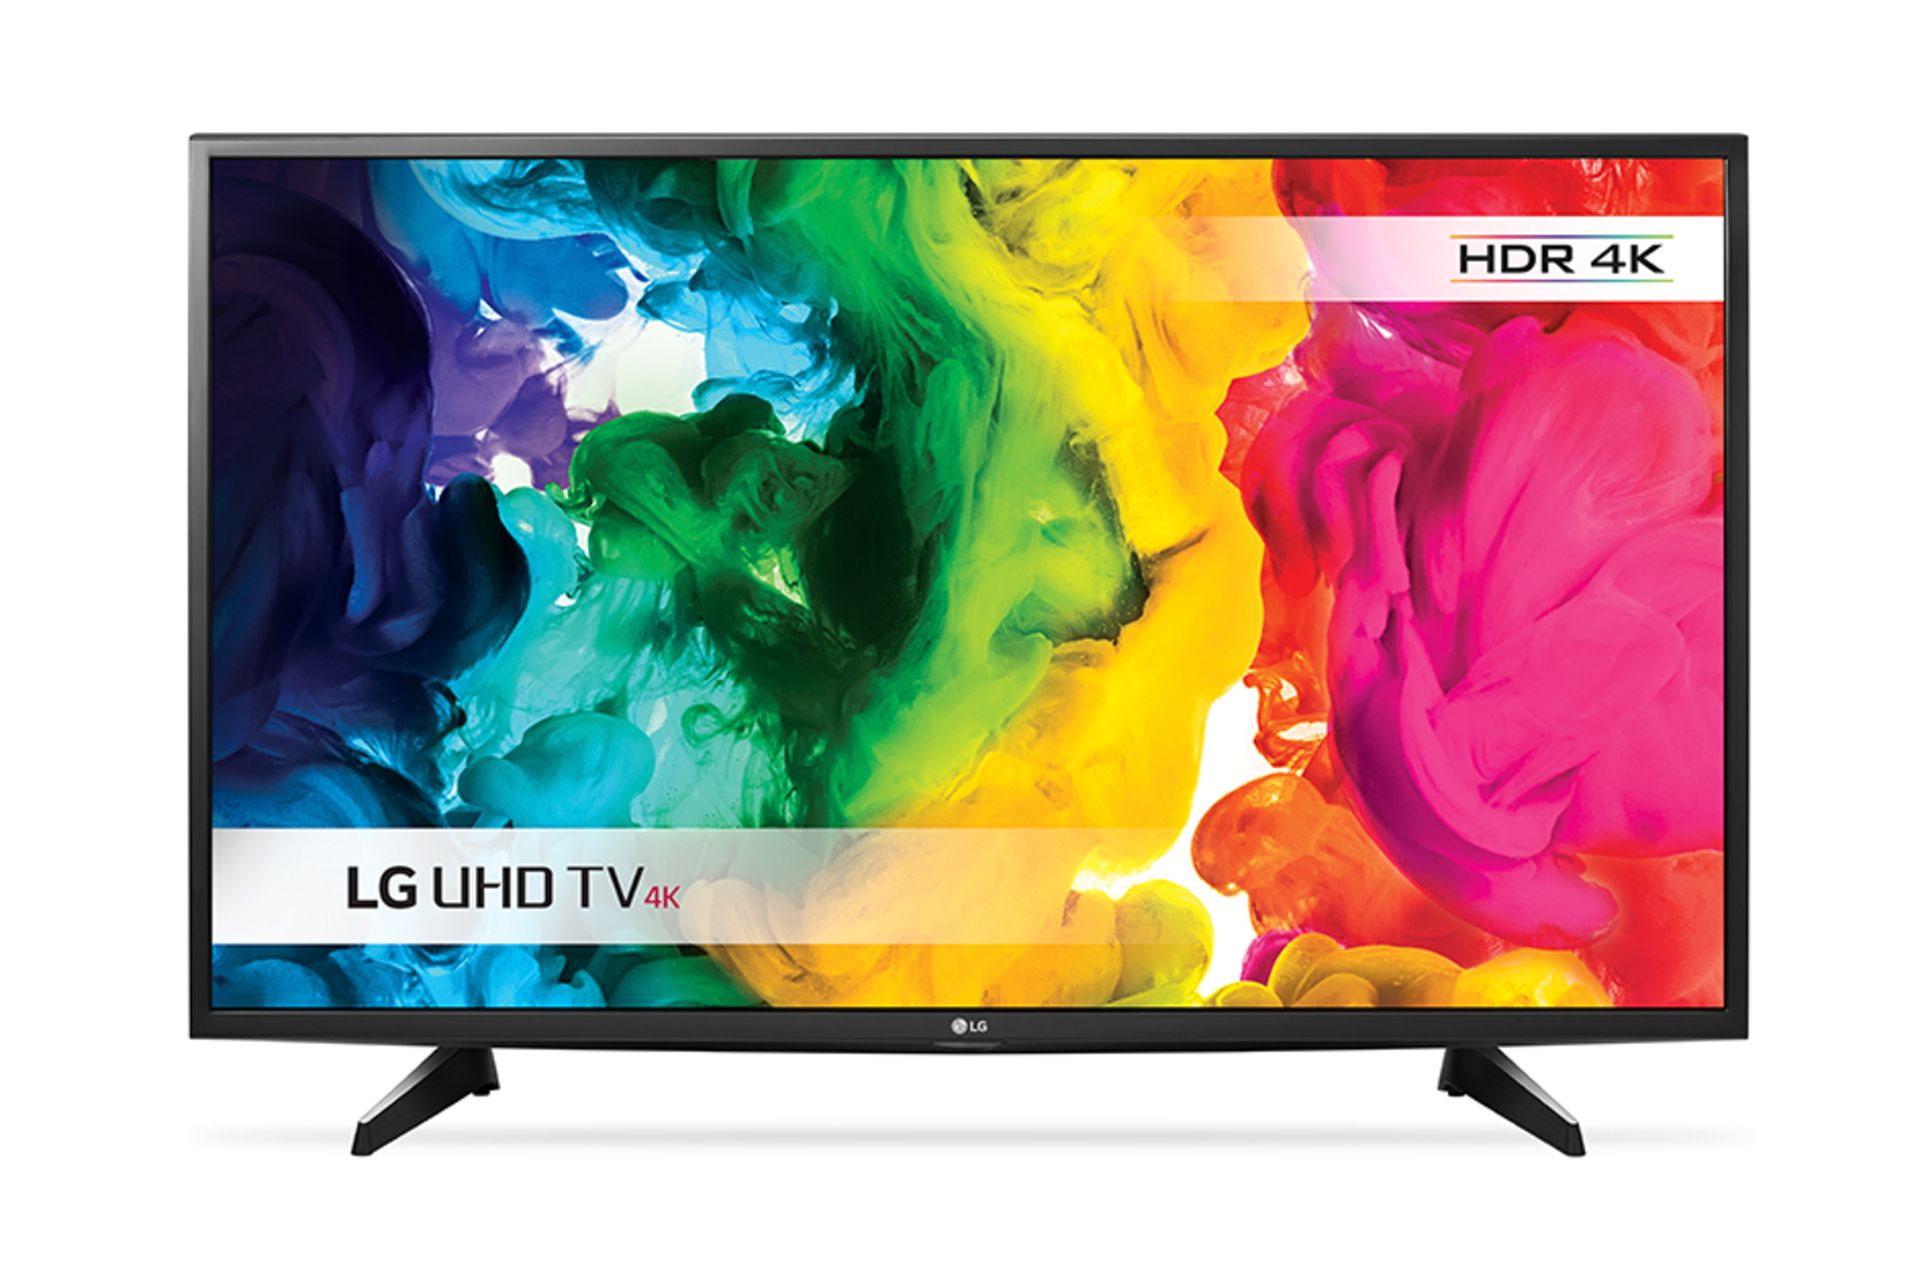 V Grade A LG 49" HDR Pro 4K Ultra HD Smar TV With WebOS - Ultra Surround - 3D Colour Mapping